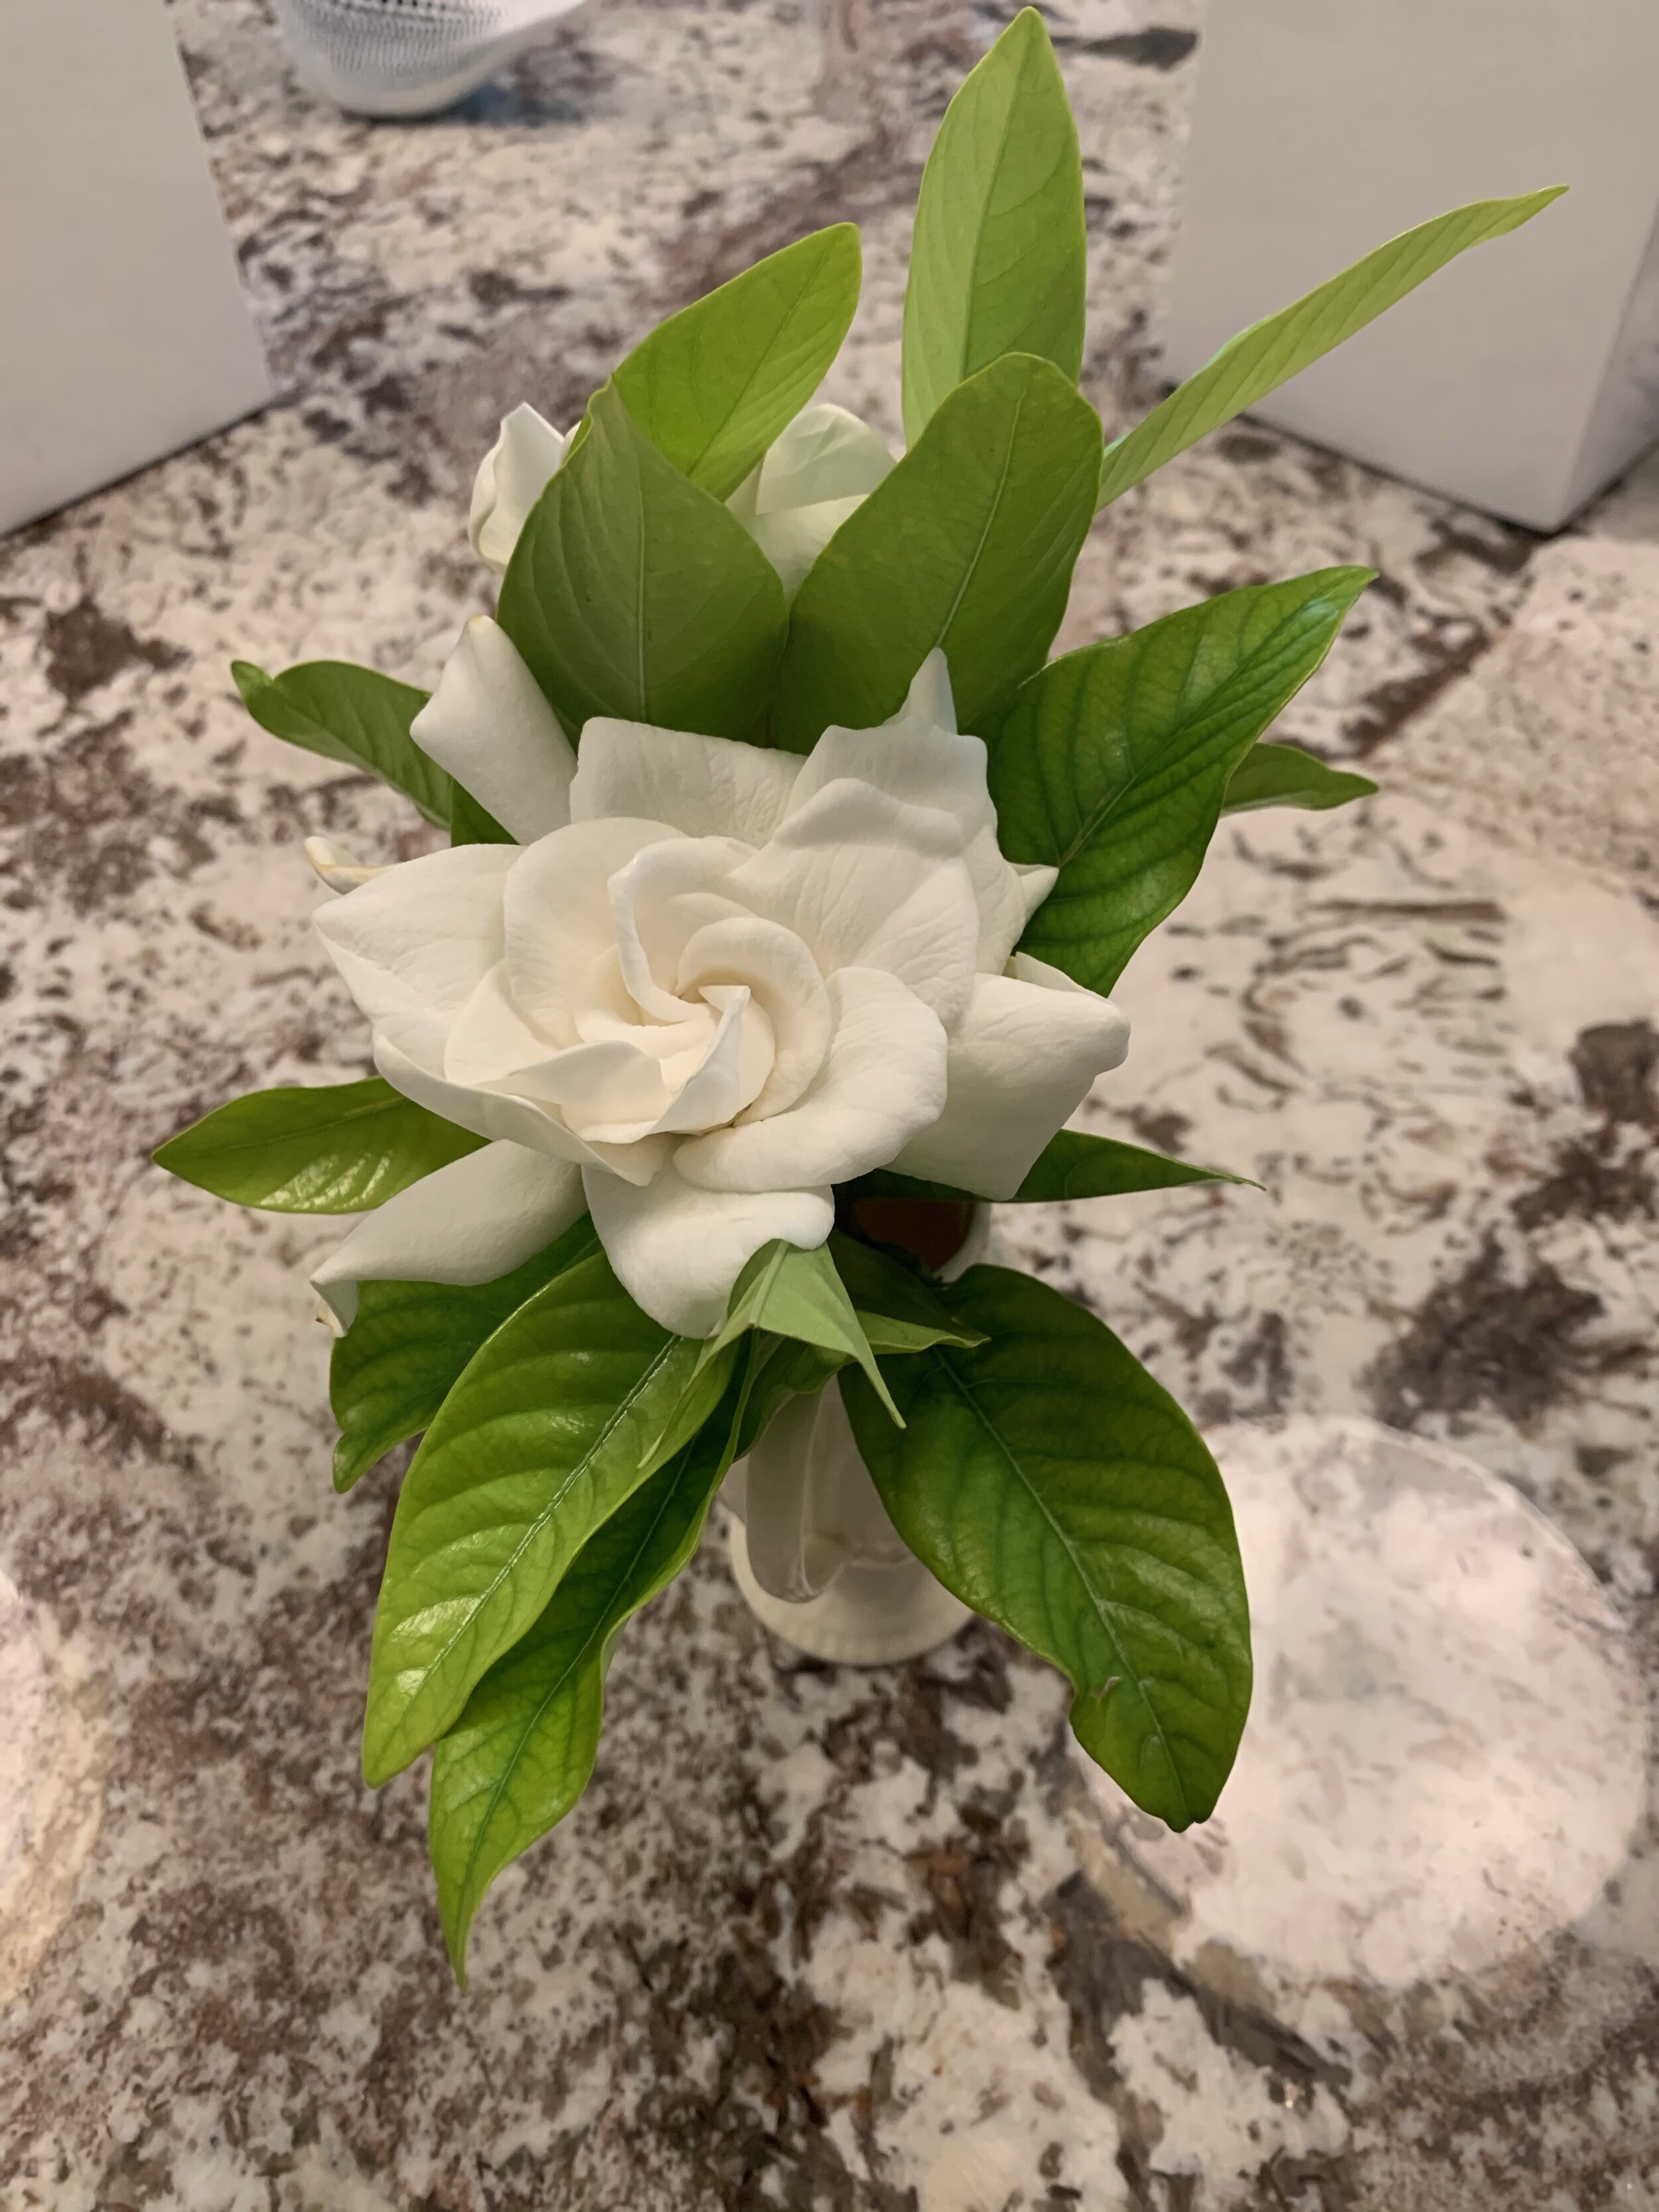 Gardenia Blossom.  One of the great things about Florida. These things grow as shrubs. Amazing fragrance.